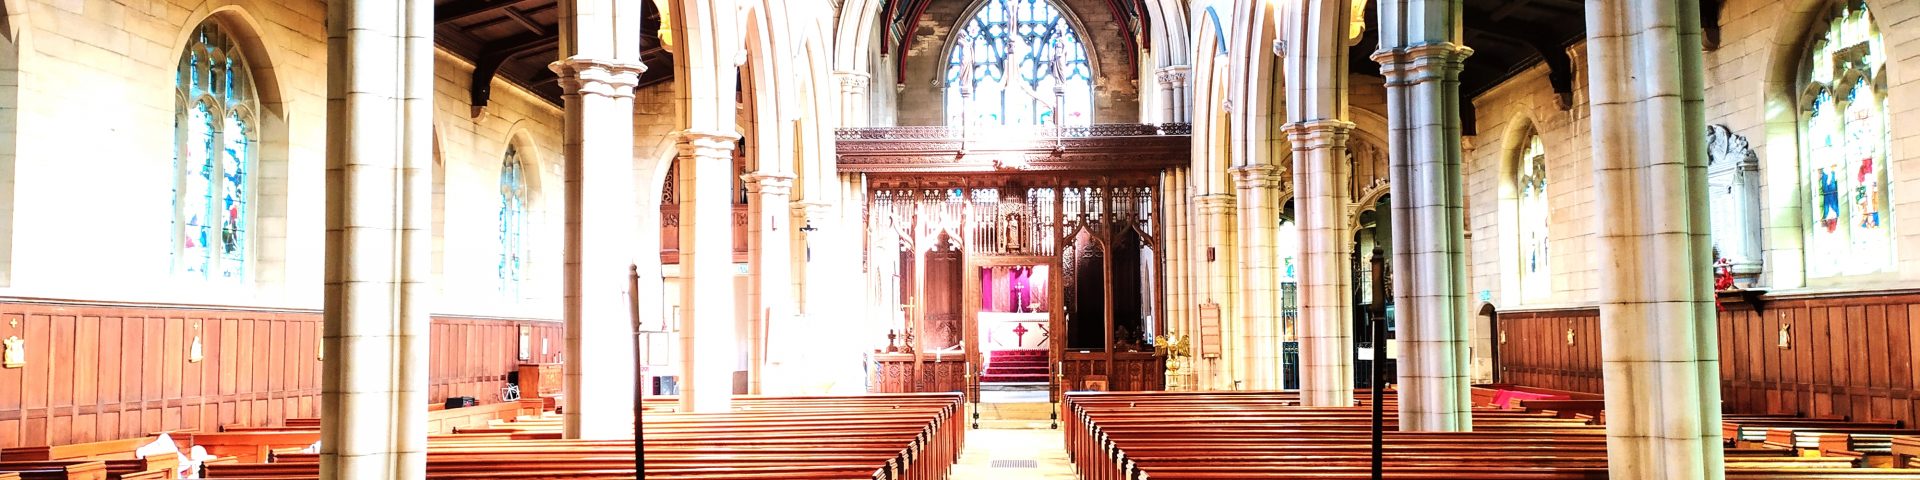 Looking east in St Bartholomew's Church